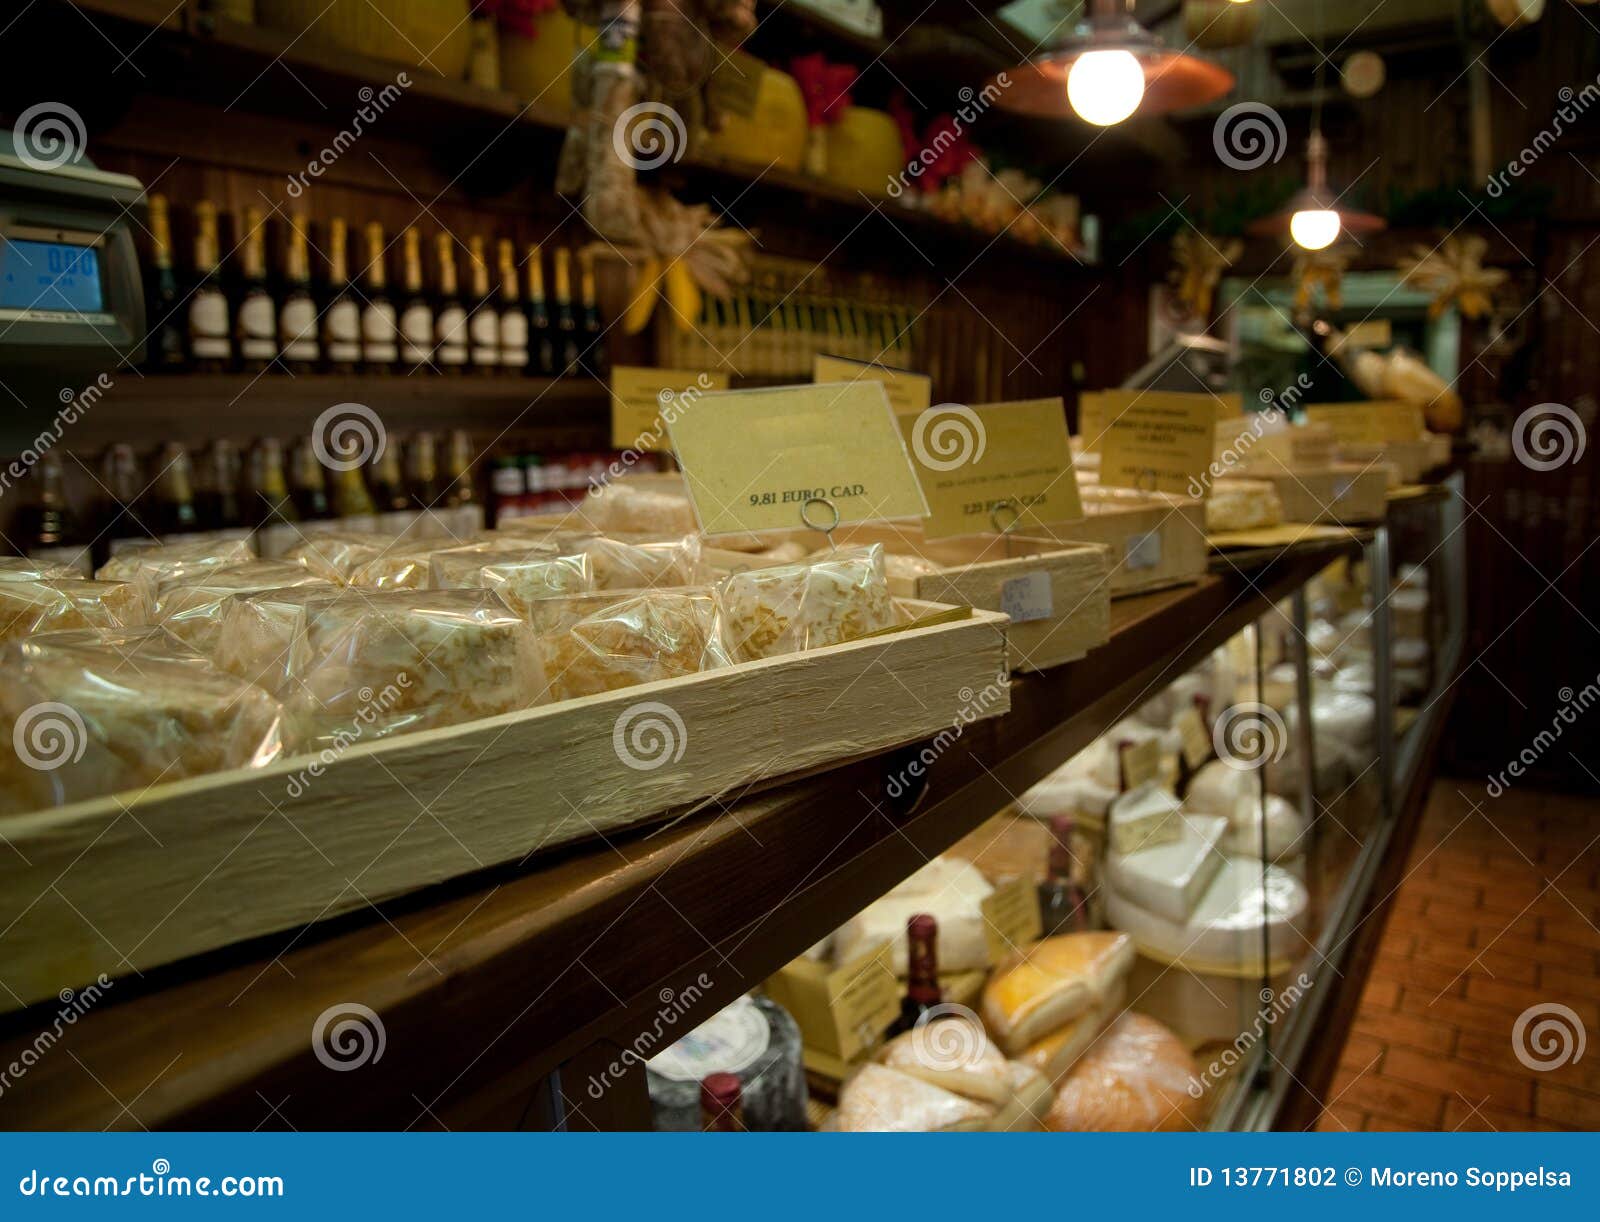 typical italian cheese shop